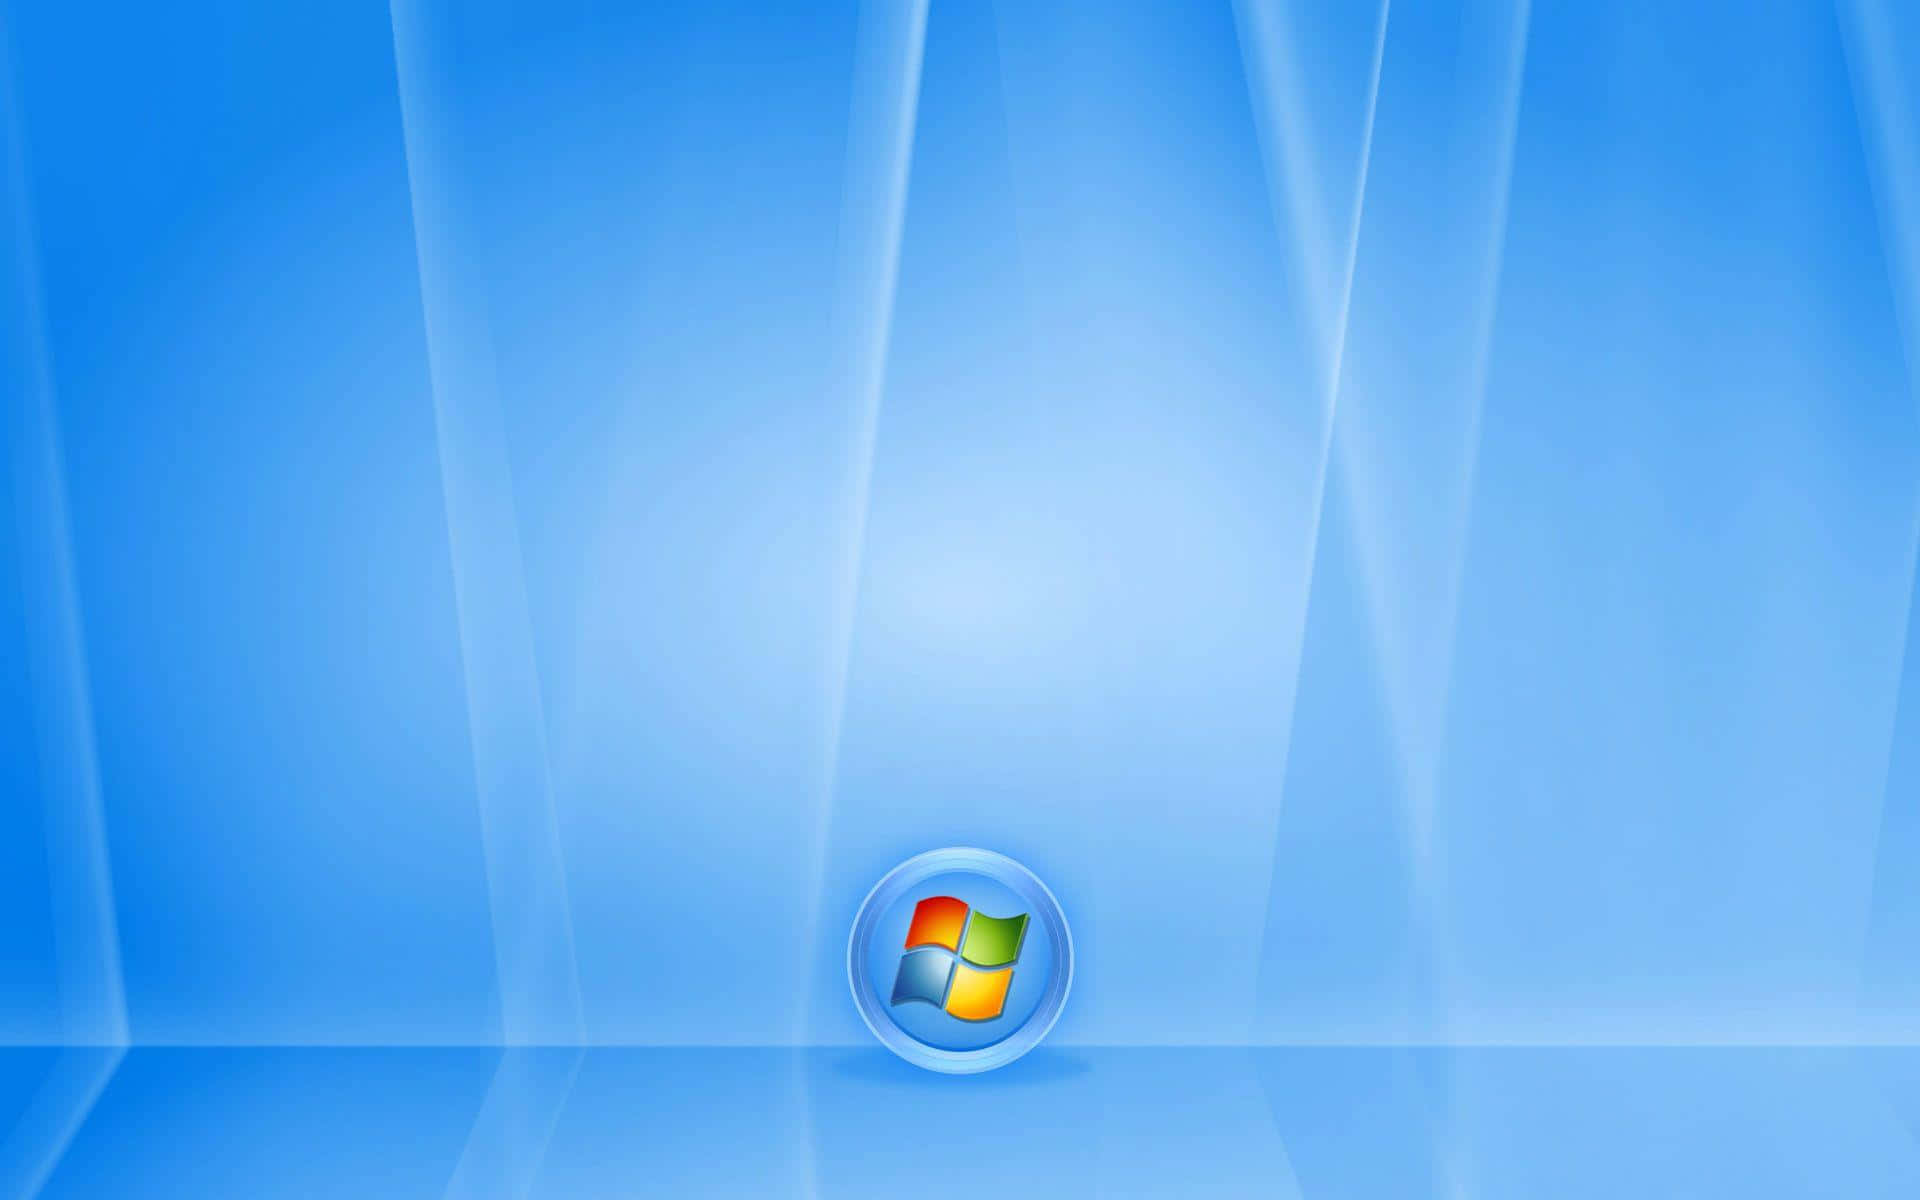 Windows Vista - A Reliable, High-Performing Operating System